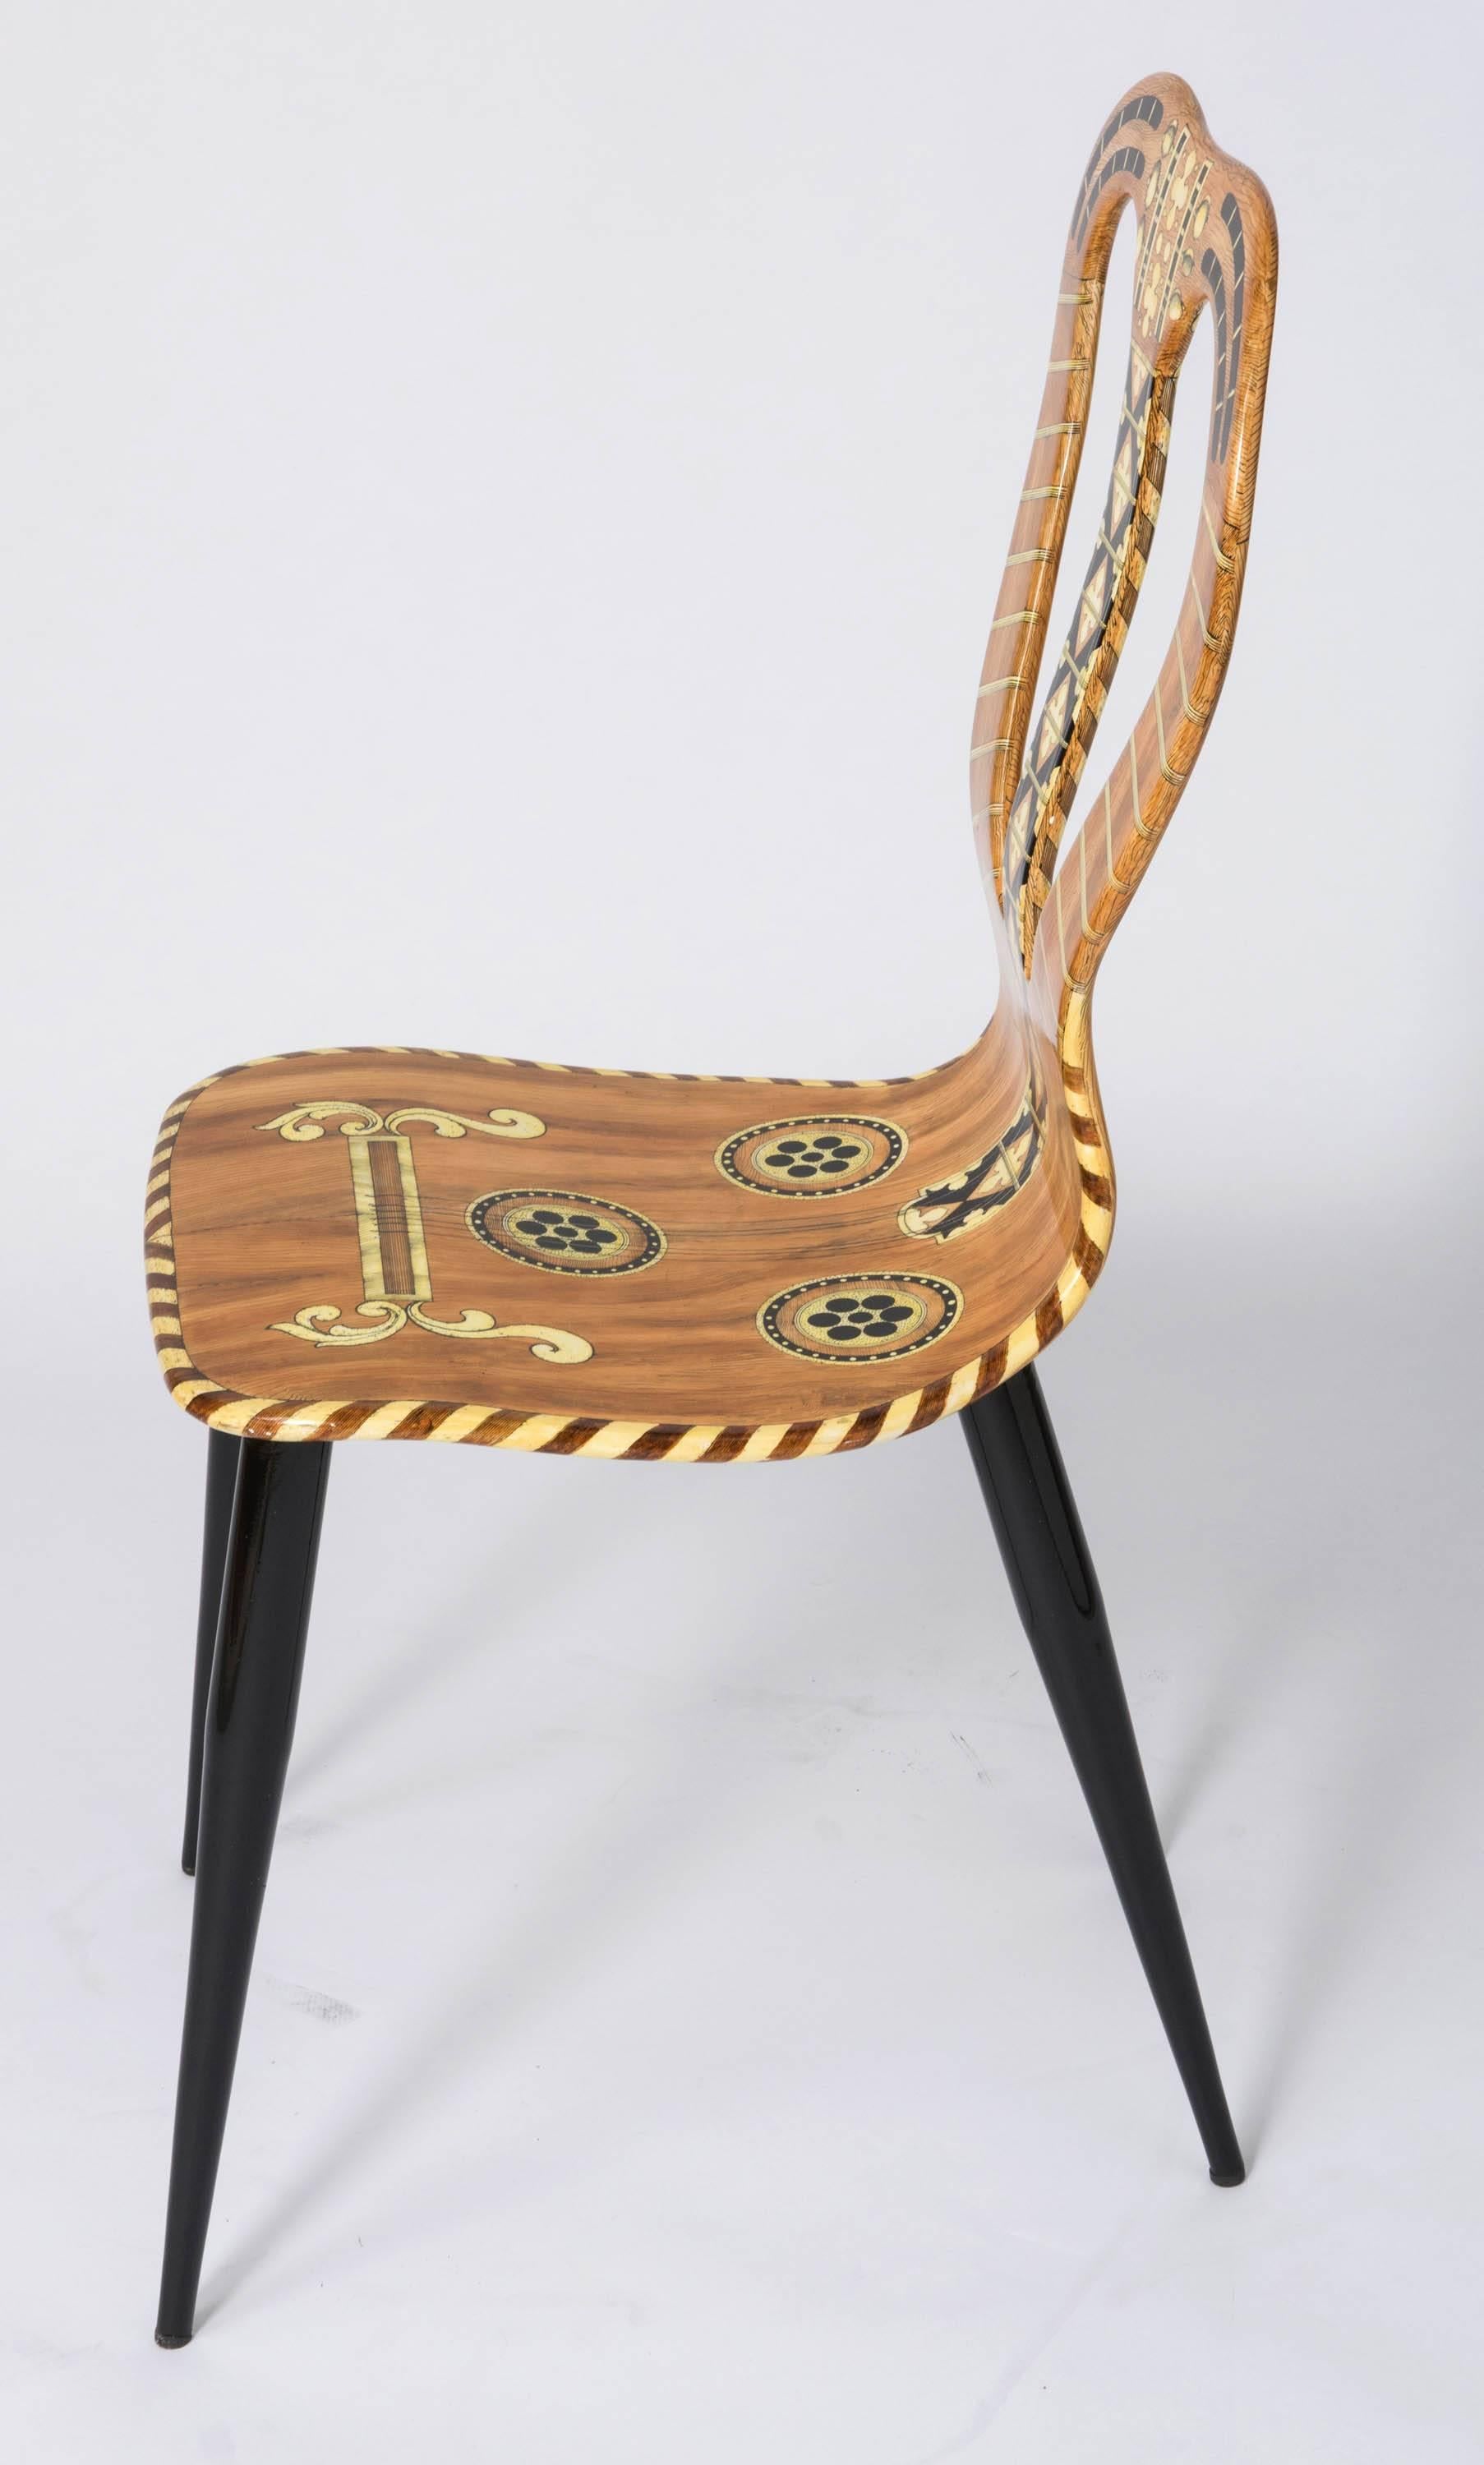 A “Musicale” chair by Atelier Fornasetti.
Lithographically printed. Hand coloured
wood, lacquer, metal tubular legs.
Italy, 1989
Marked no. 17/60/89 60
Measures: 95.5 cm high x 41 cm wide x 40 cm deep.
 